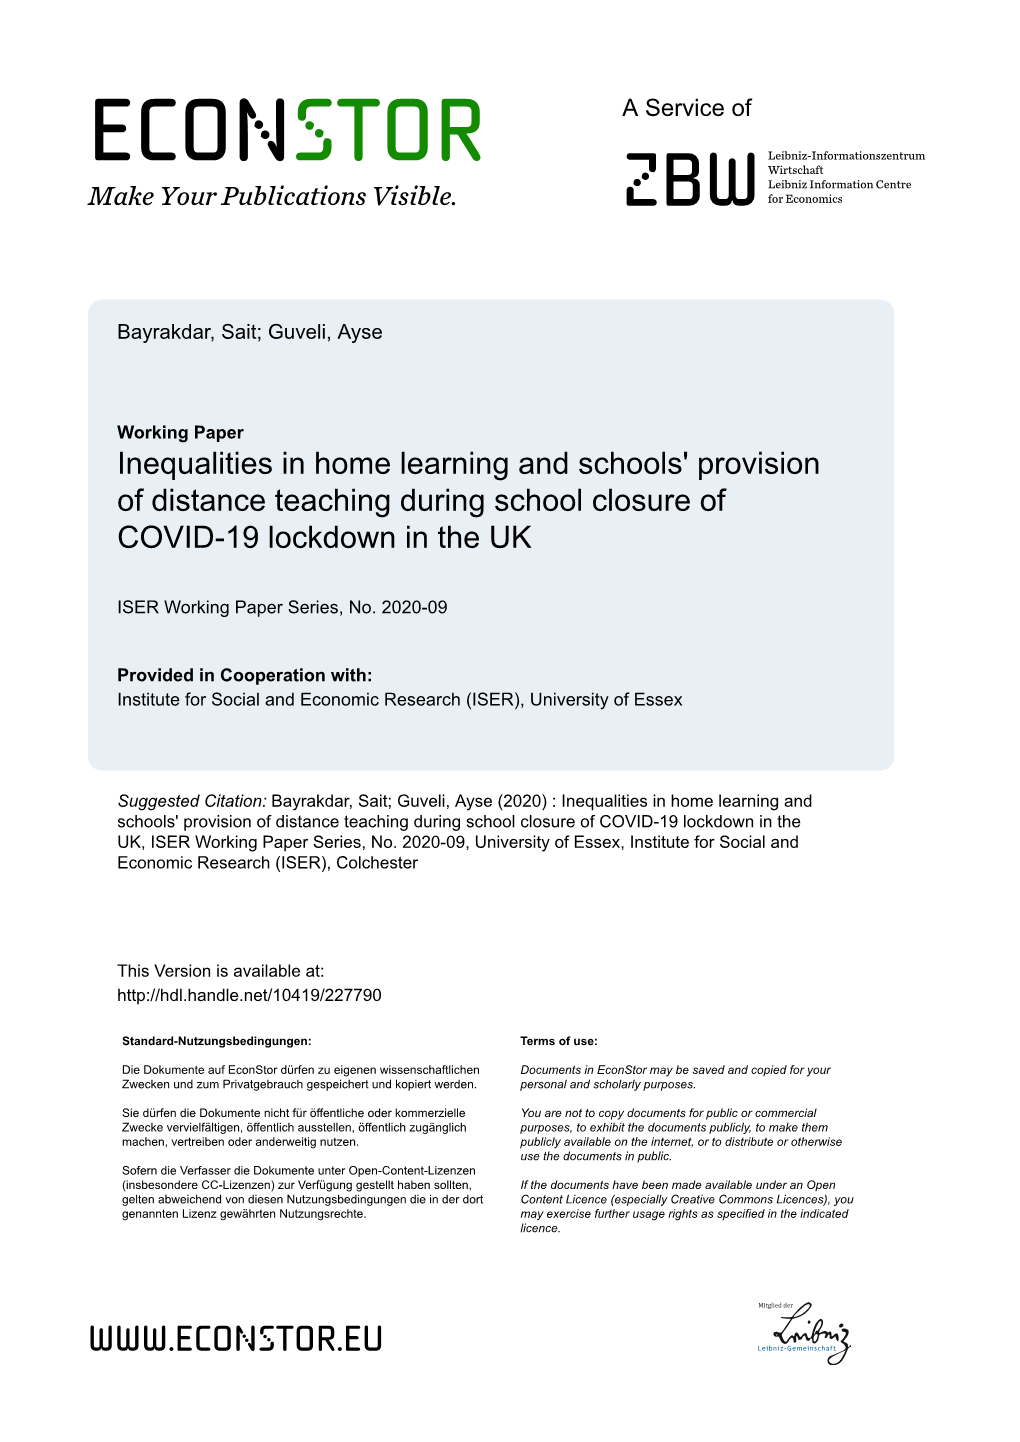 Inequalities in Home Learning and Schools' Provision of Distance Teaching During School Closure of COVID-19 Lockdown in the UK